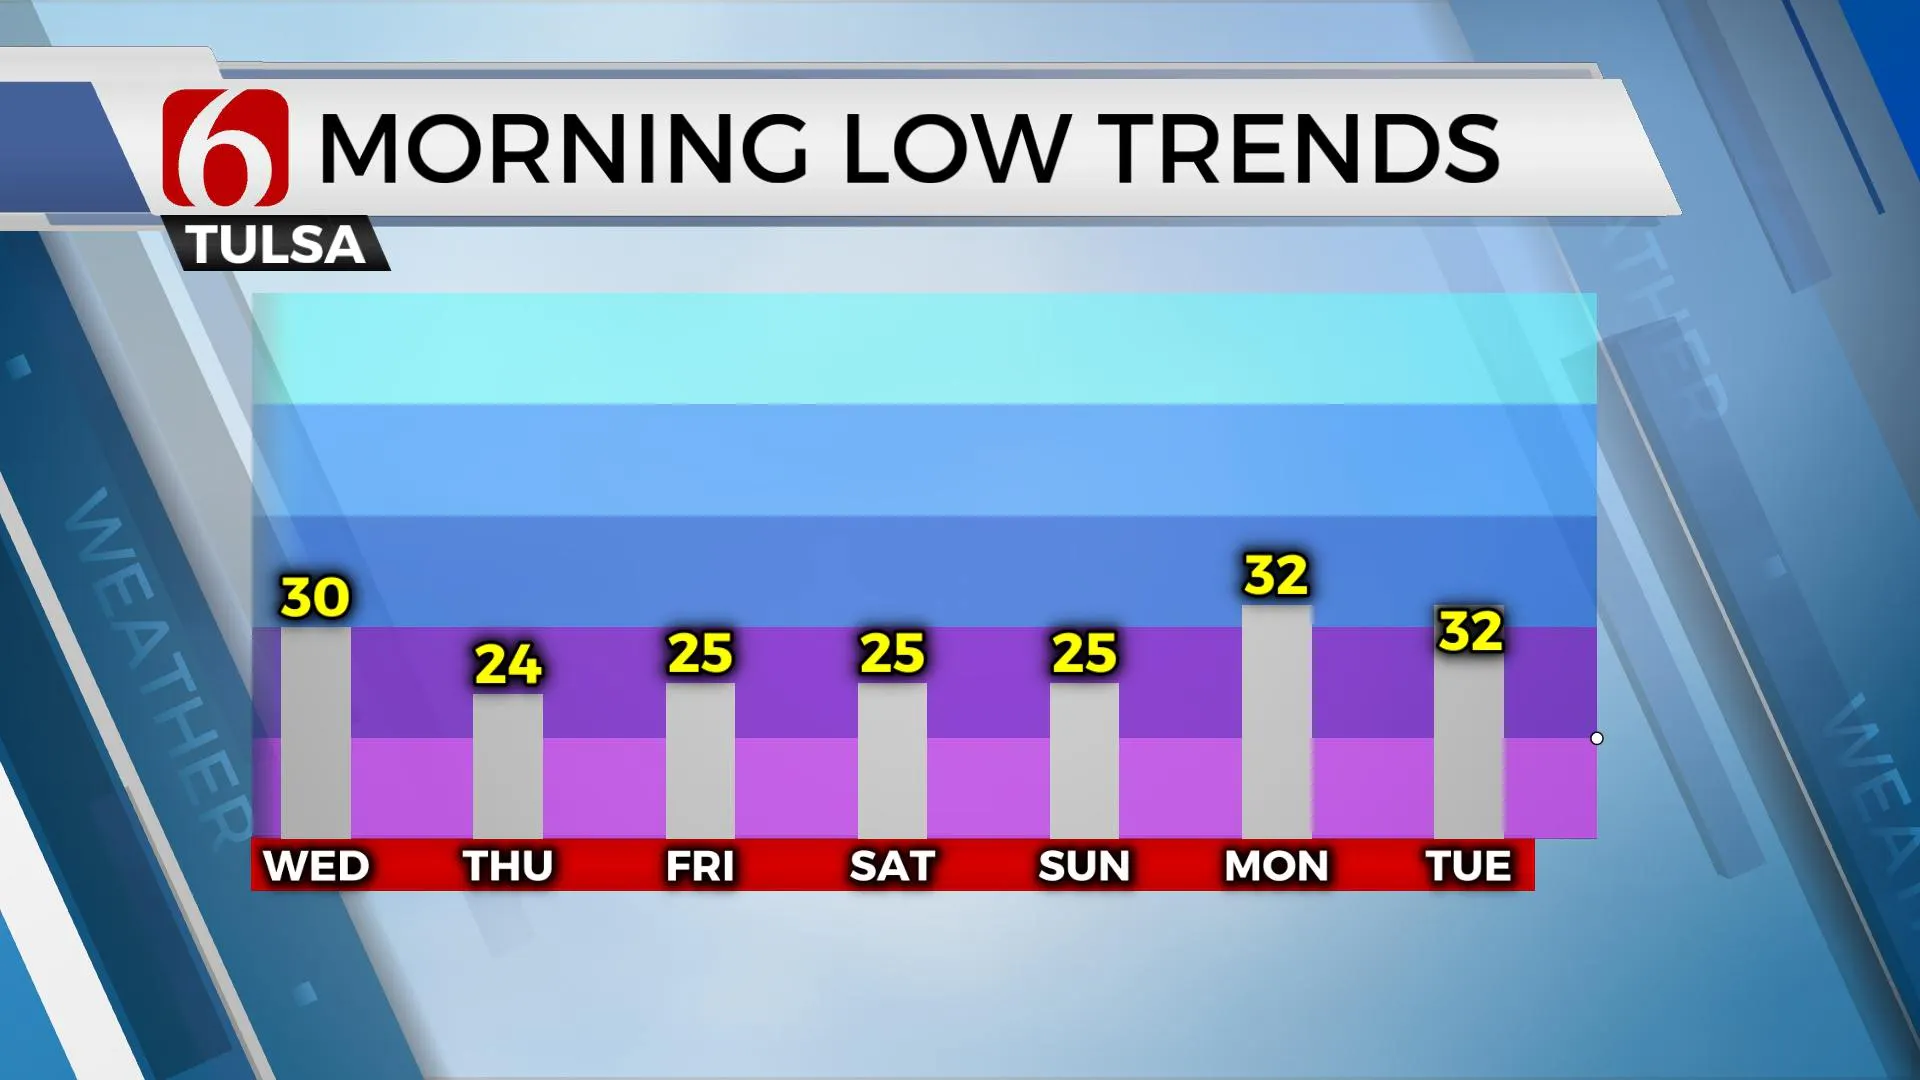 Low temps for the next week in Tulsa.